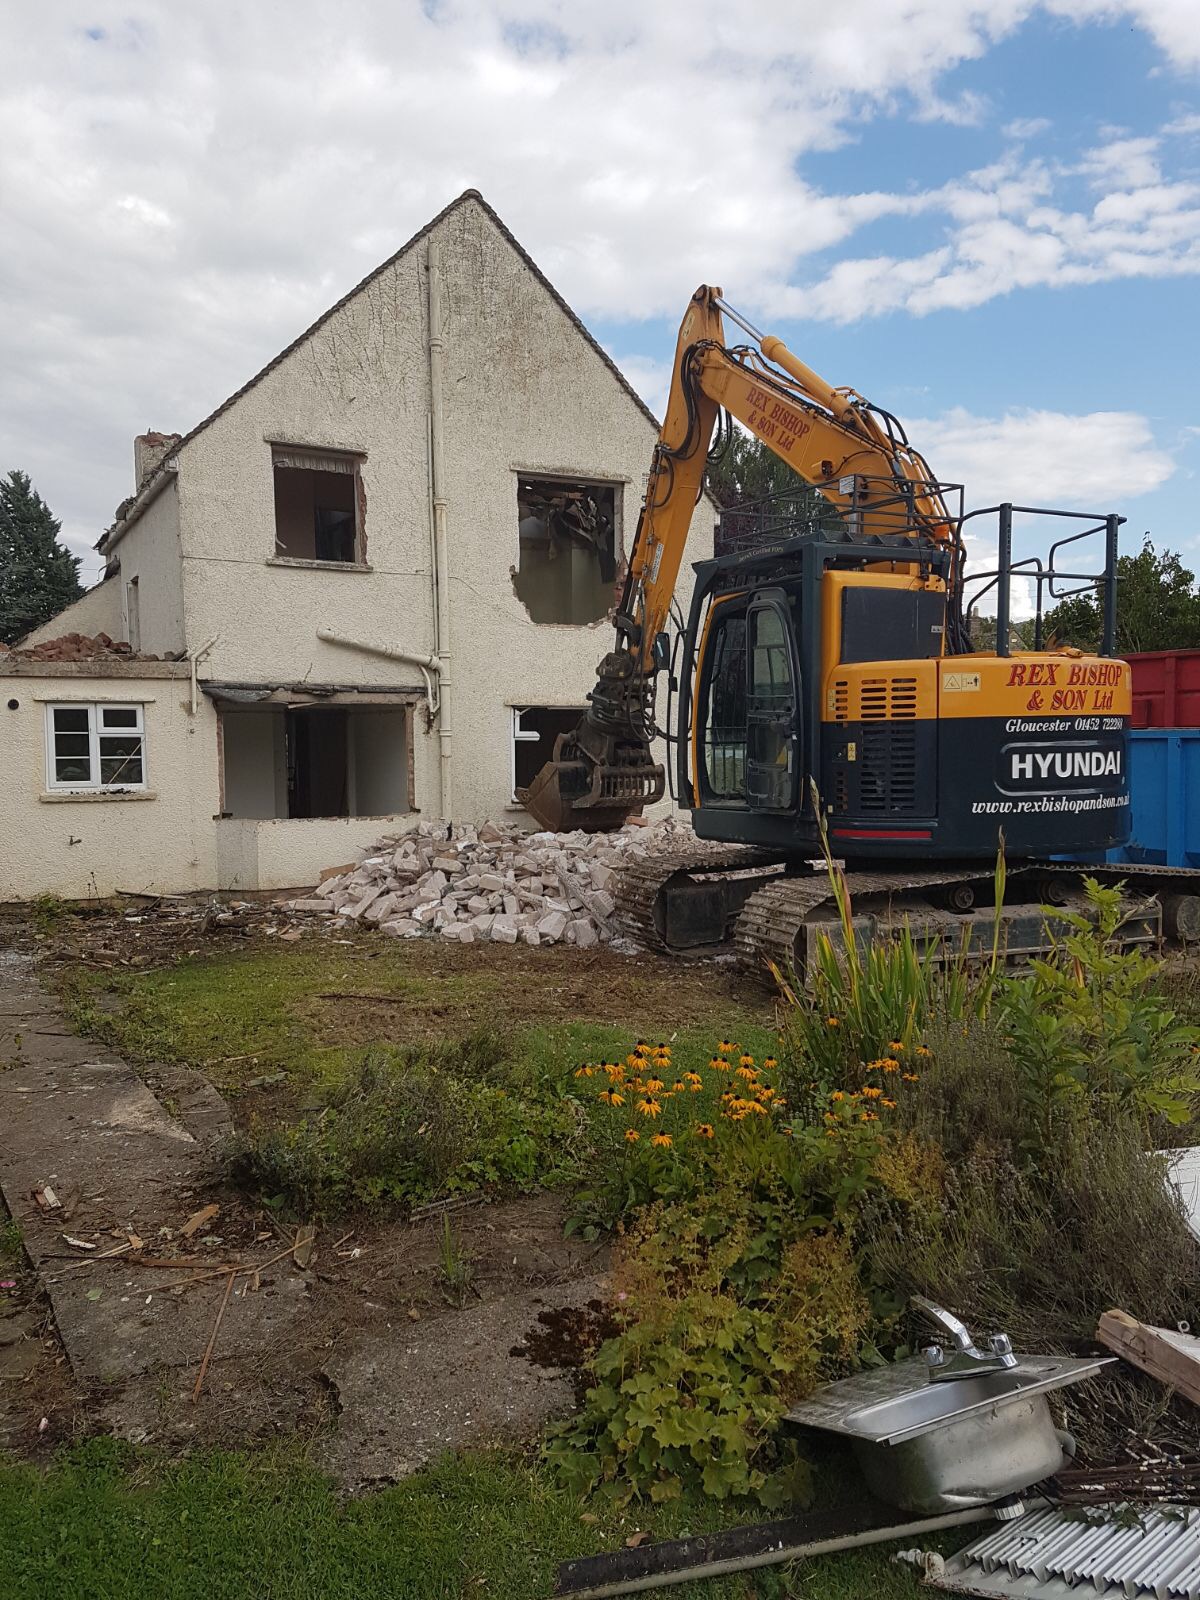 Digger in front of an abandoned house